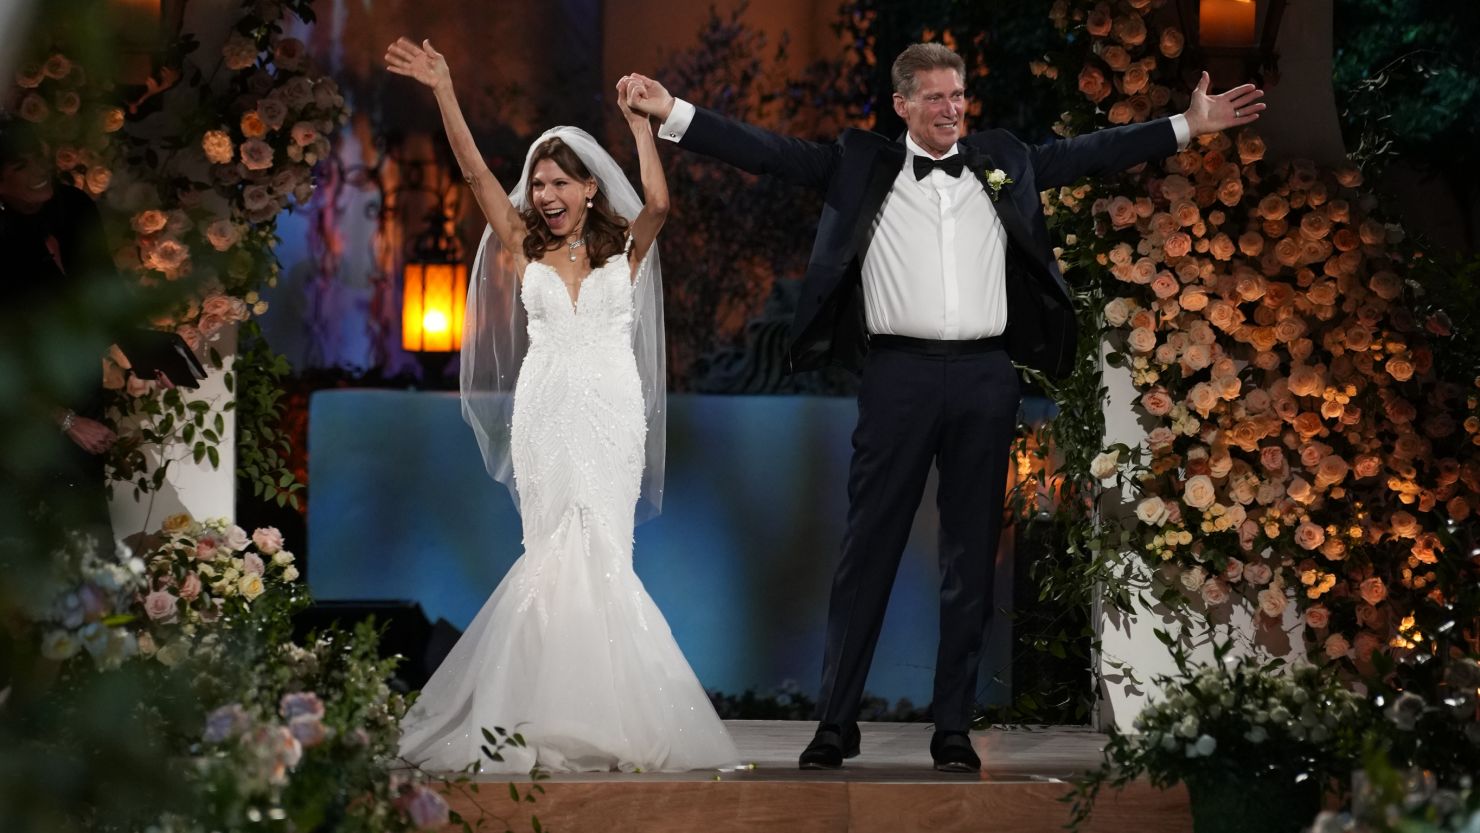 ‘The Golden Bachelor’s’ Gerry Turner marries Theresa Nist CNN